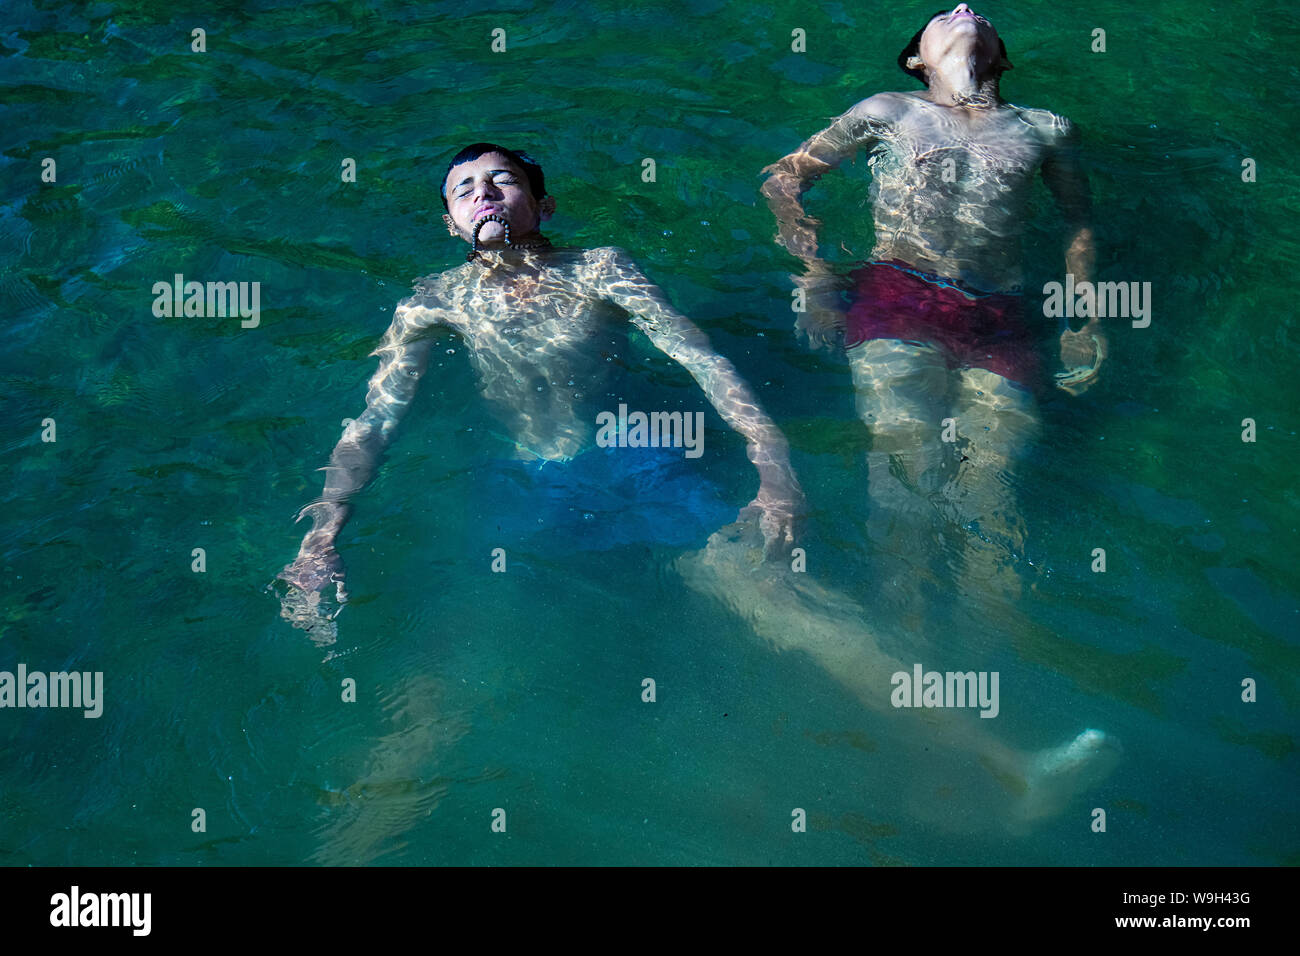 Himachal Pradesh, india - July 20th, 2019: Floating dead bodies of a drowned male children in River swimming pool murder. concept of safety Stock Photo